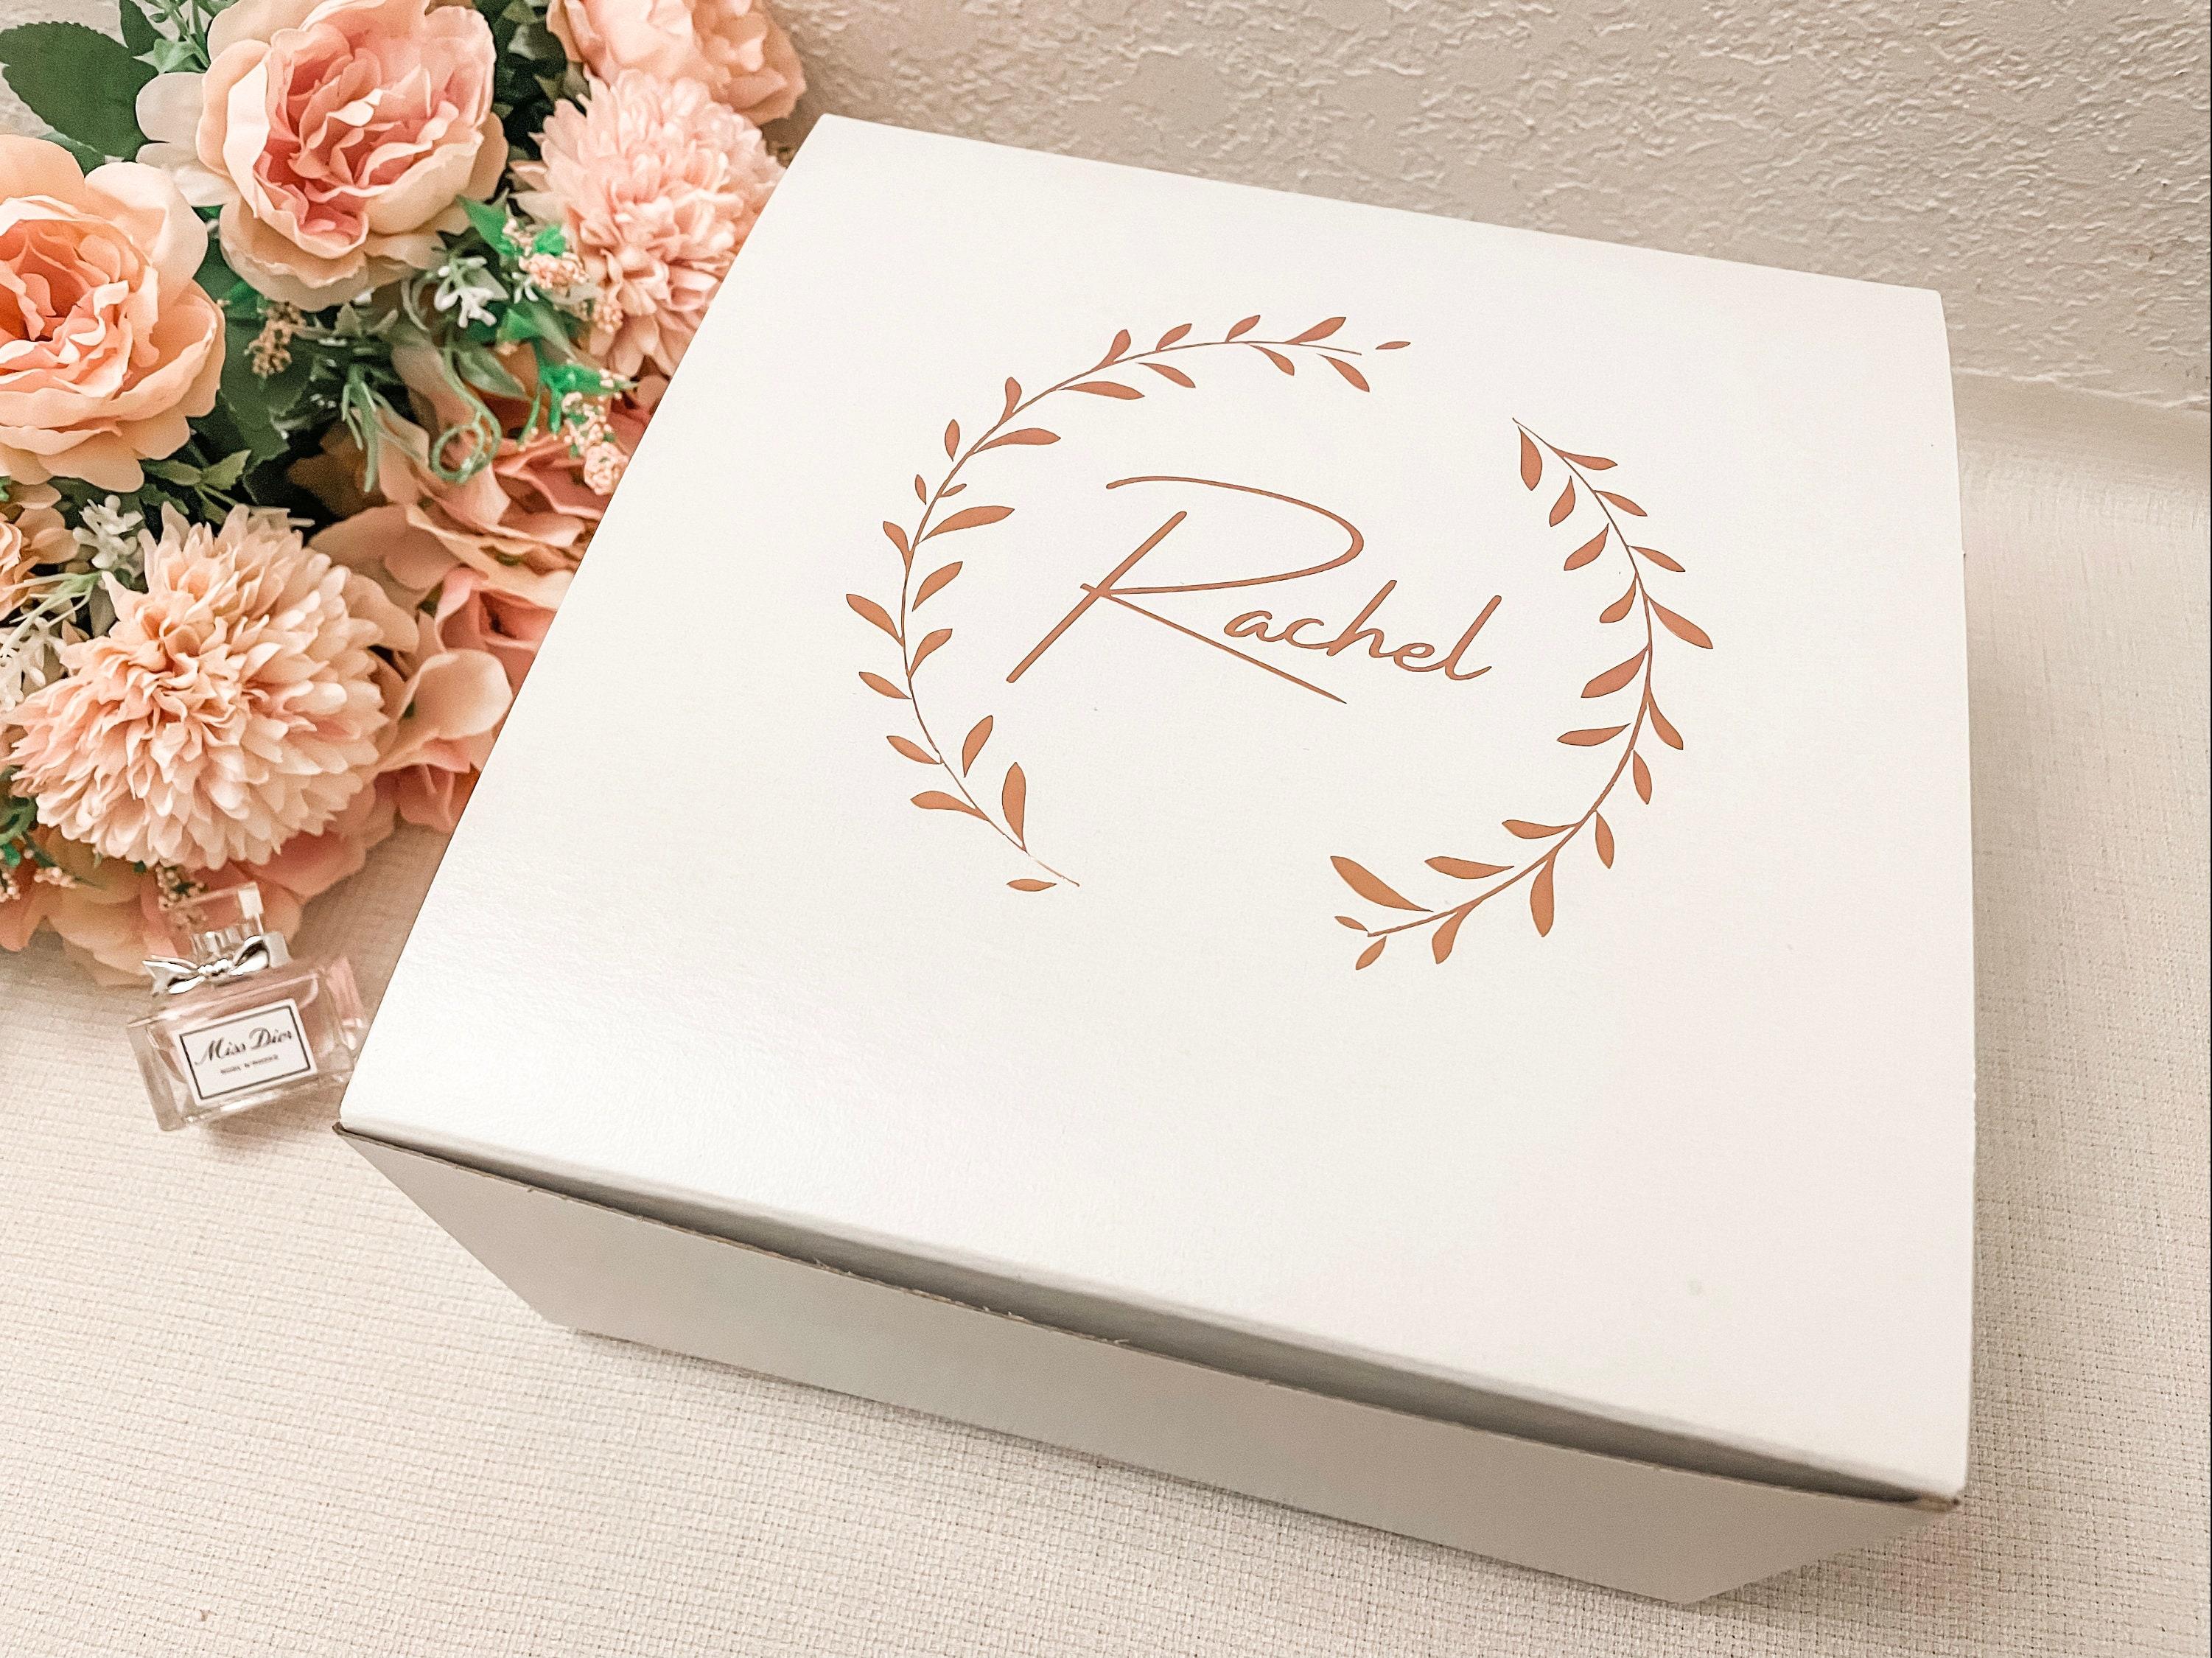 Personalized Rose Gold Bridesmaid Proposal Gift Boxes, Personalized gift box Wreath, Empty Custom Gift Box, Personalized Name Box